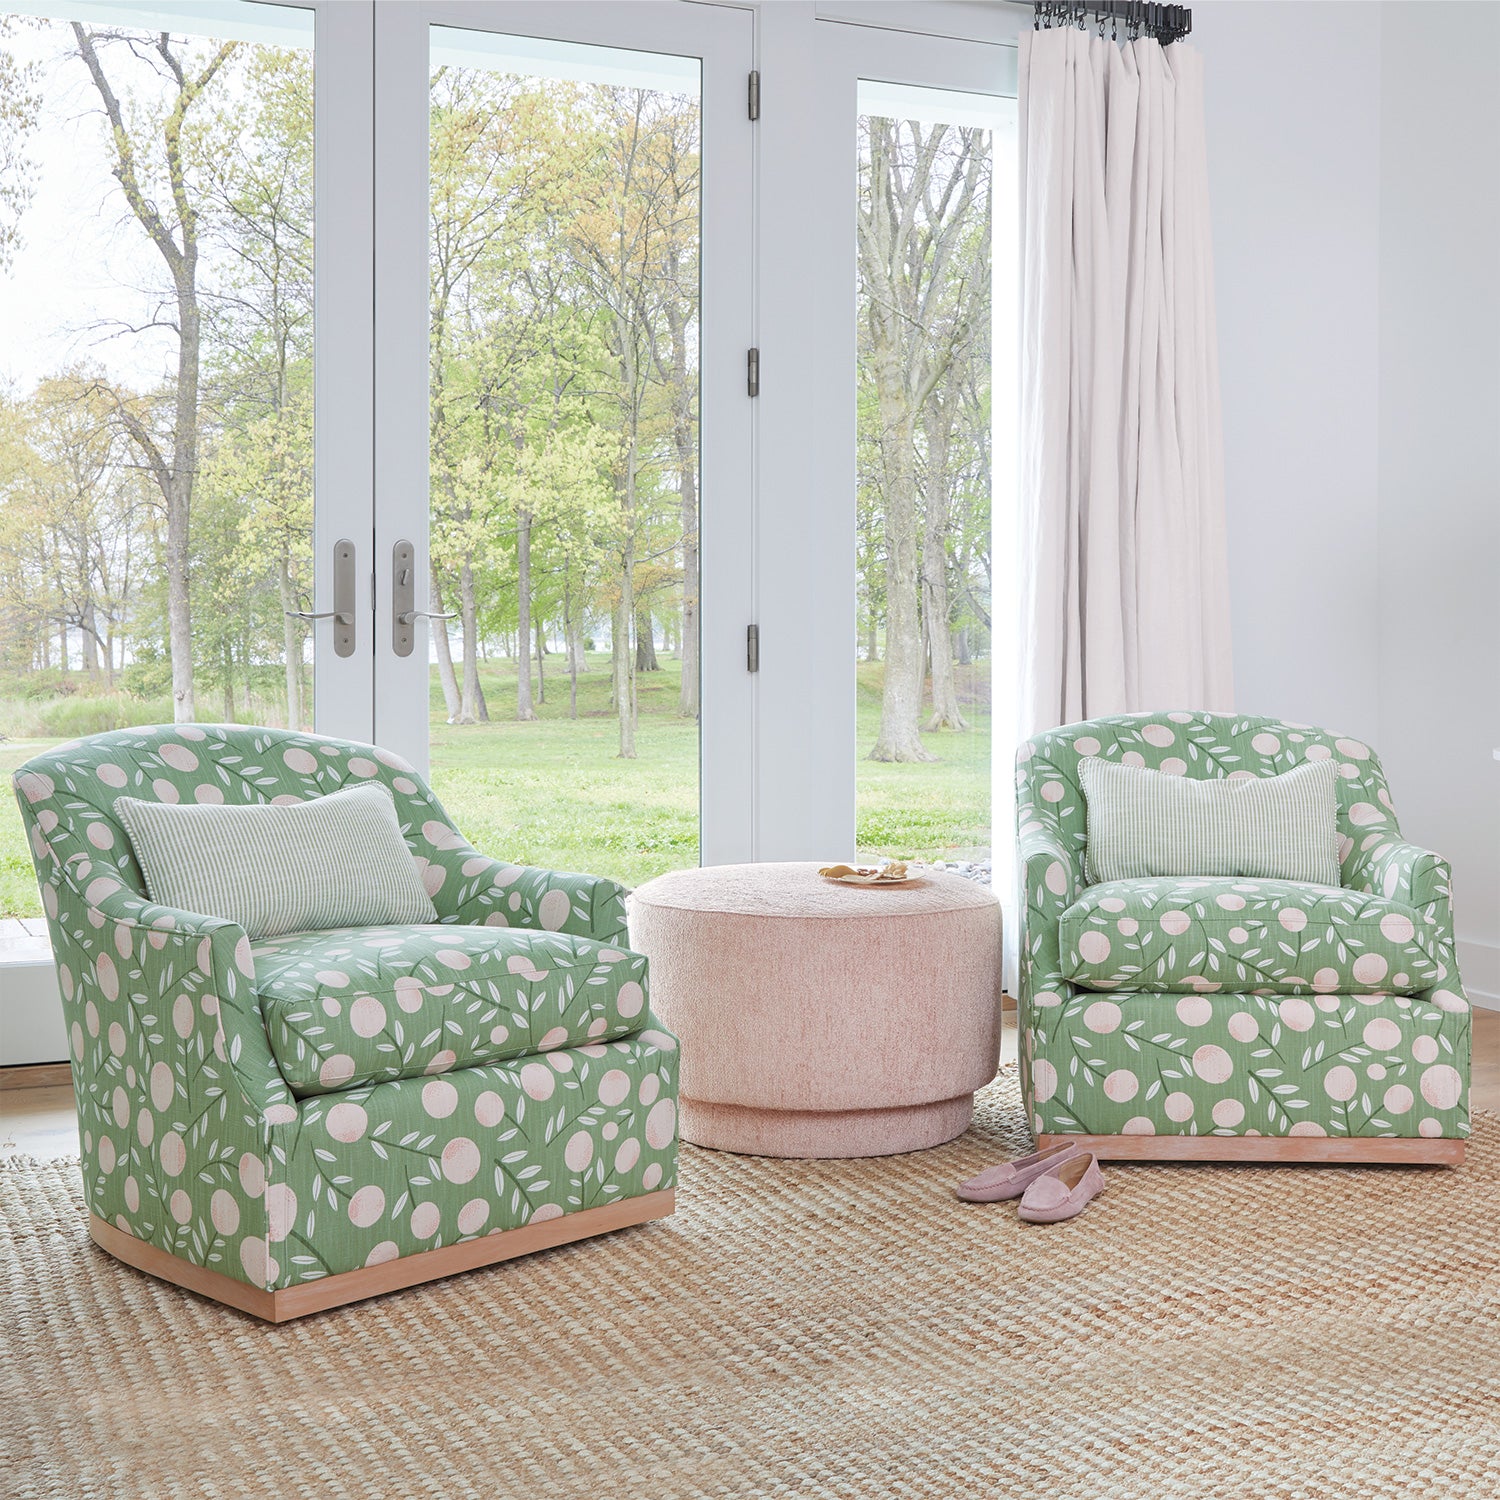 Maine Cottage Hailey Swivel Chair  | Upholstered Chairs | Maine Cottage® 